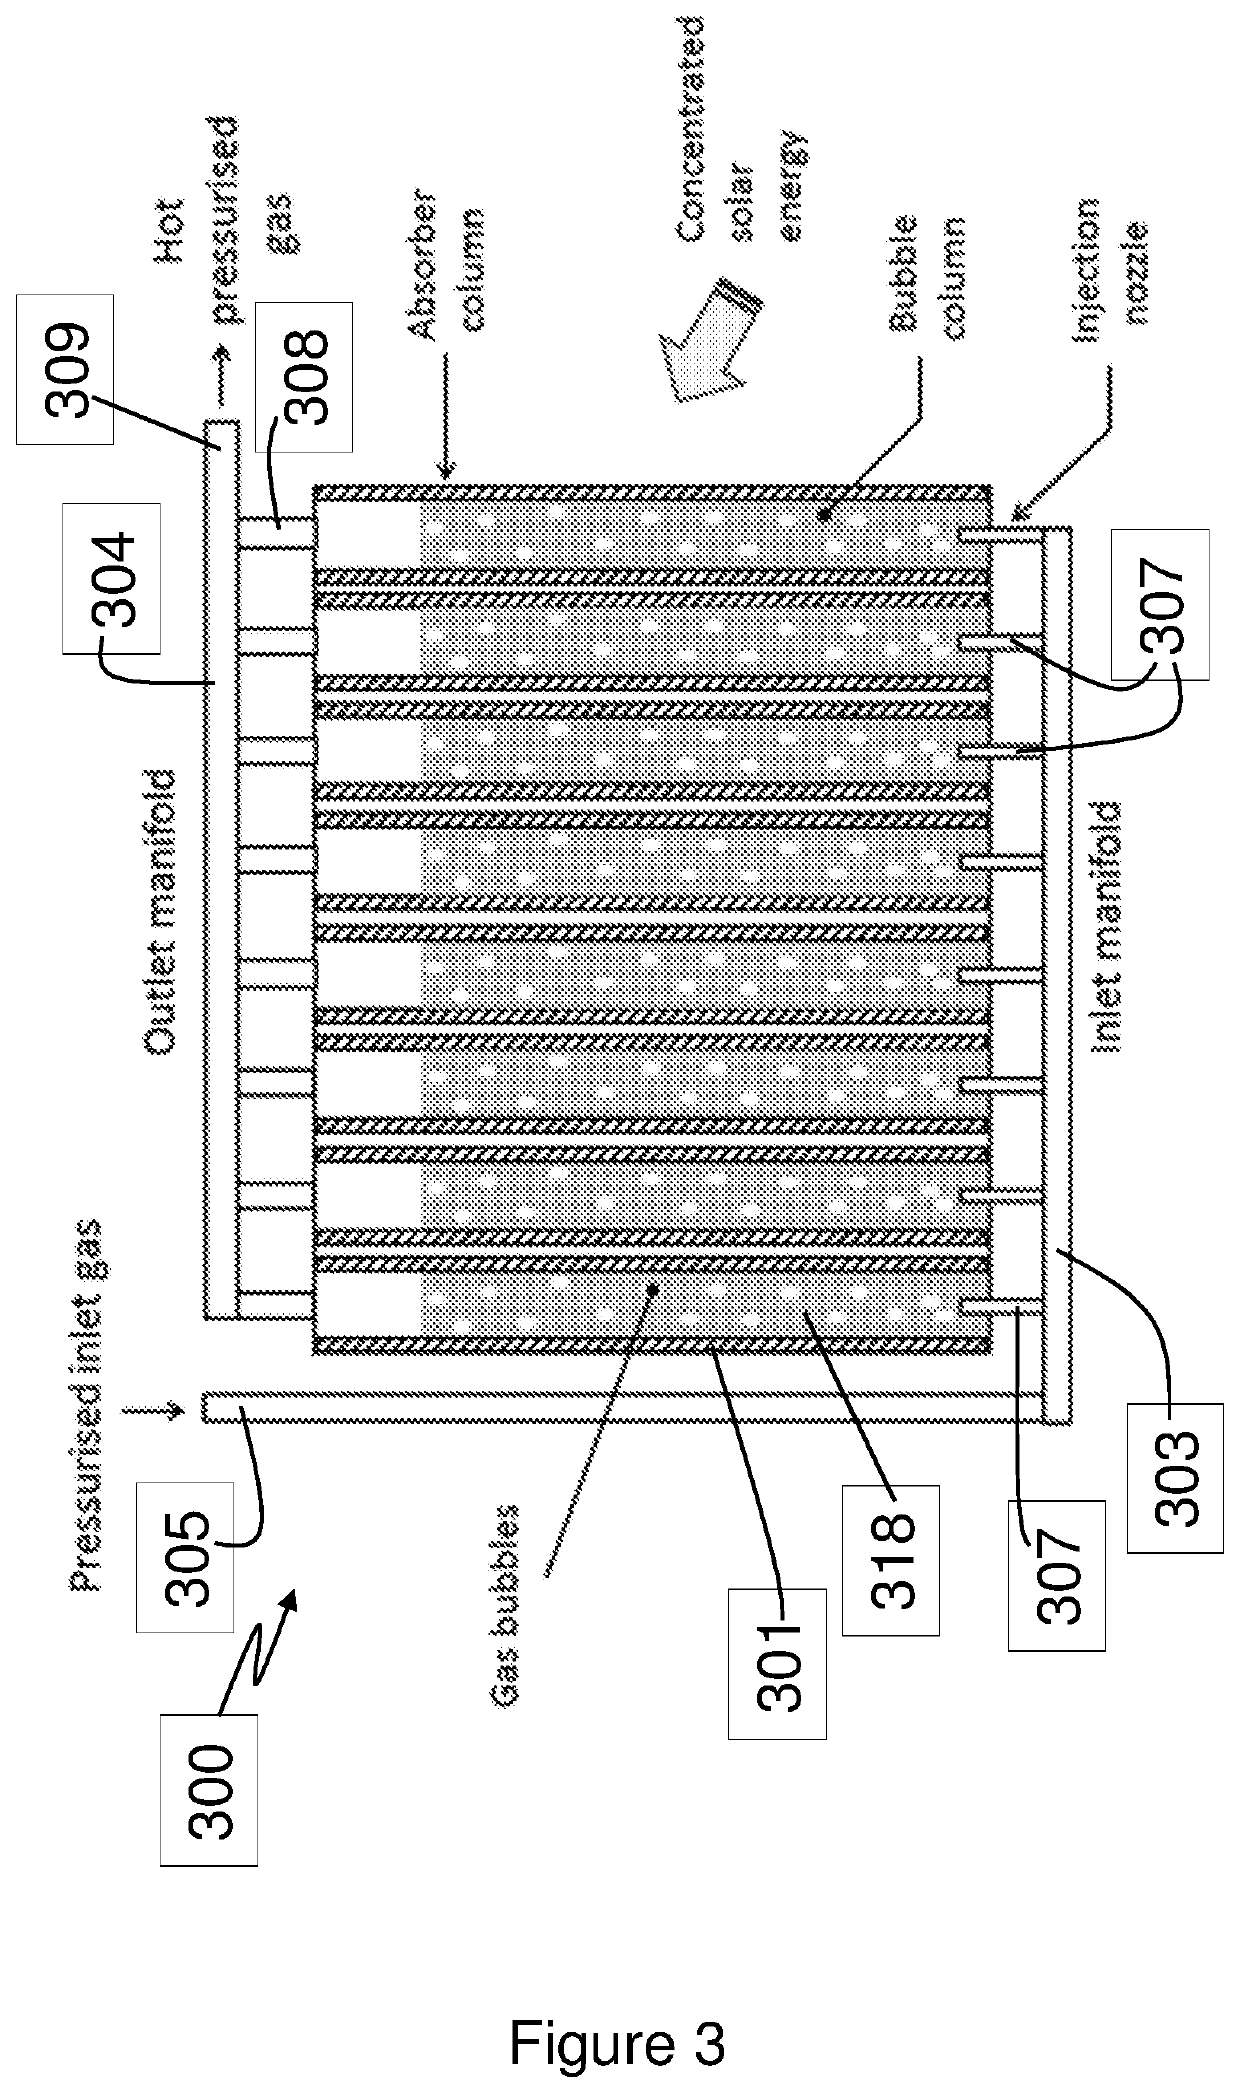 Concentrated solar receiver and reactor systems comprising heat transfer fluid